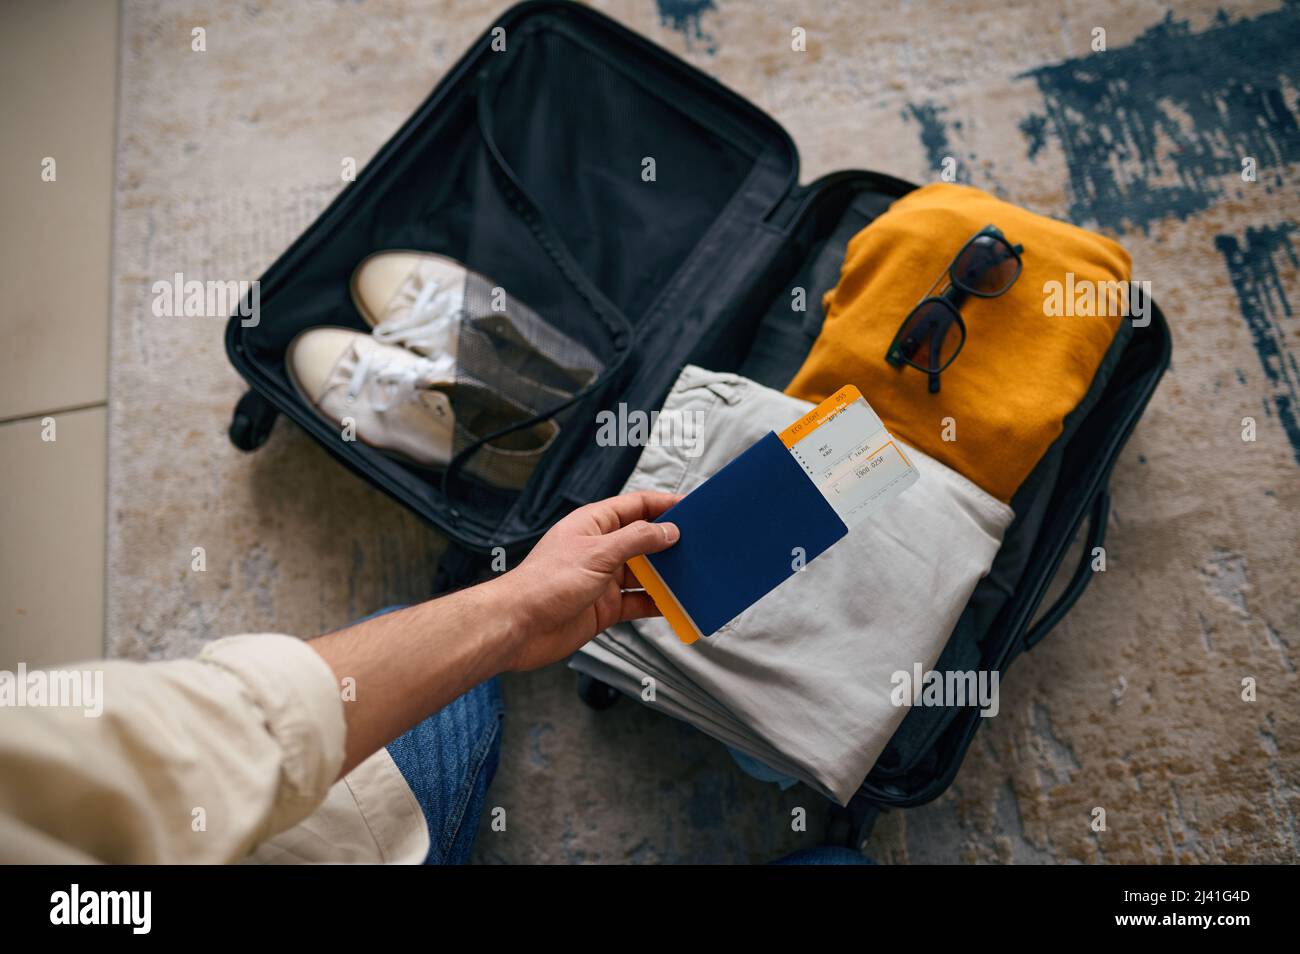 Man with travel ticket and passport at packed suitcase. Stock Photo